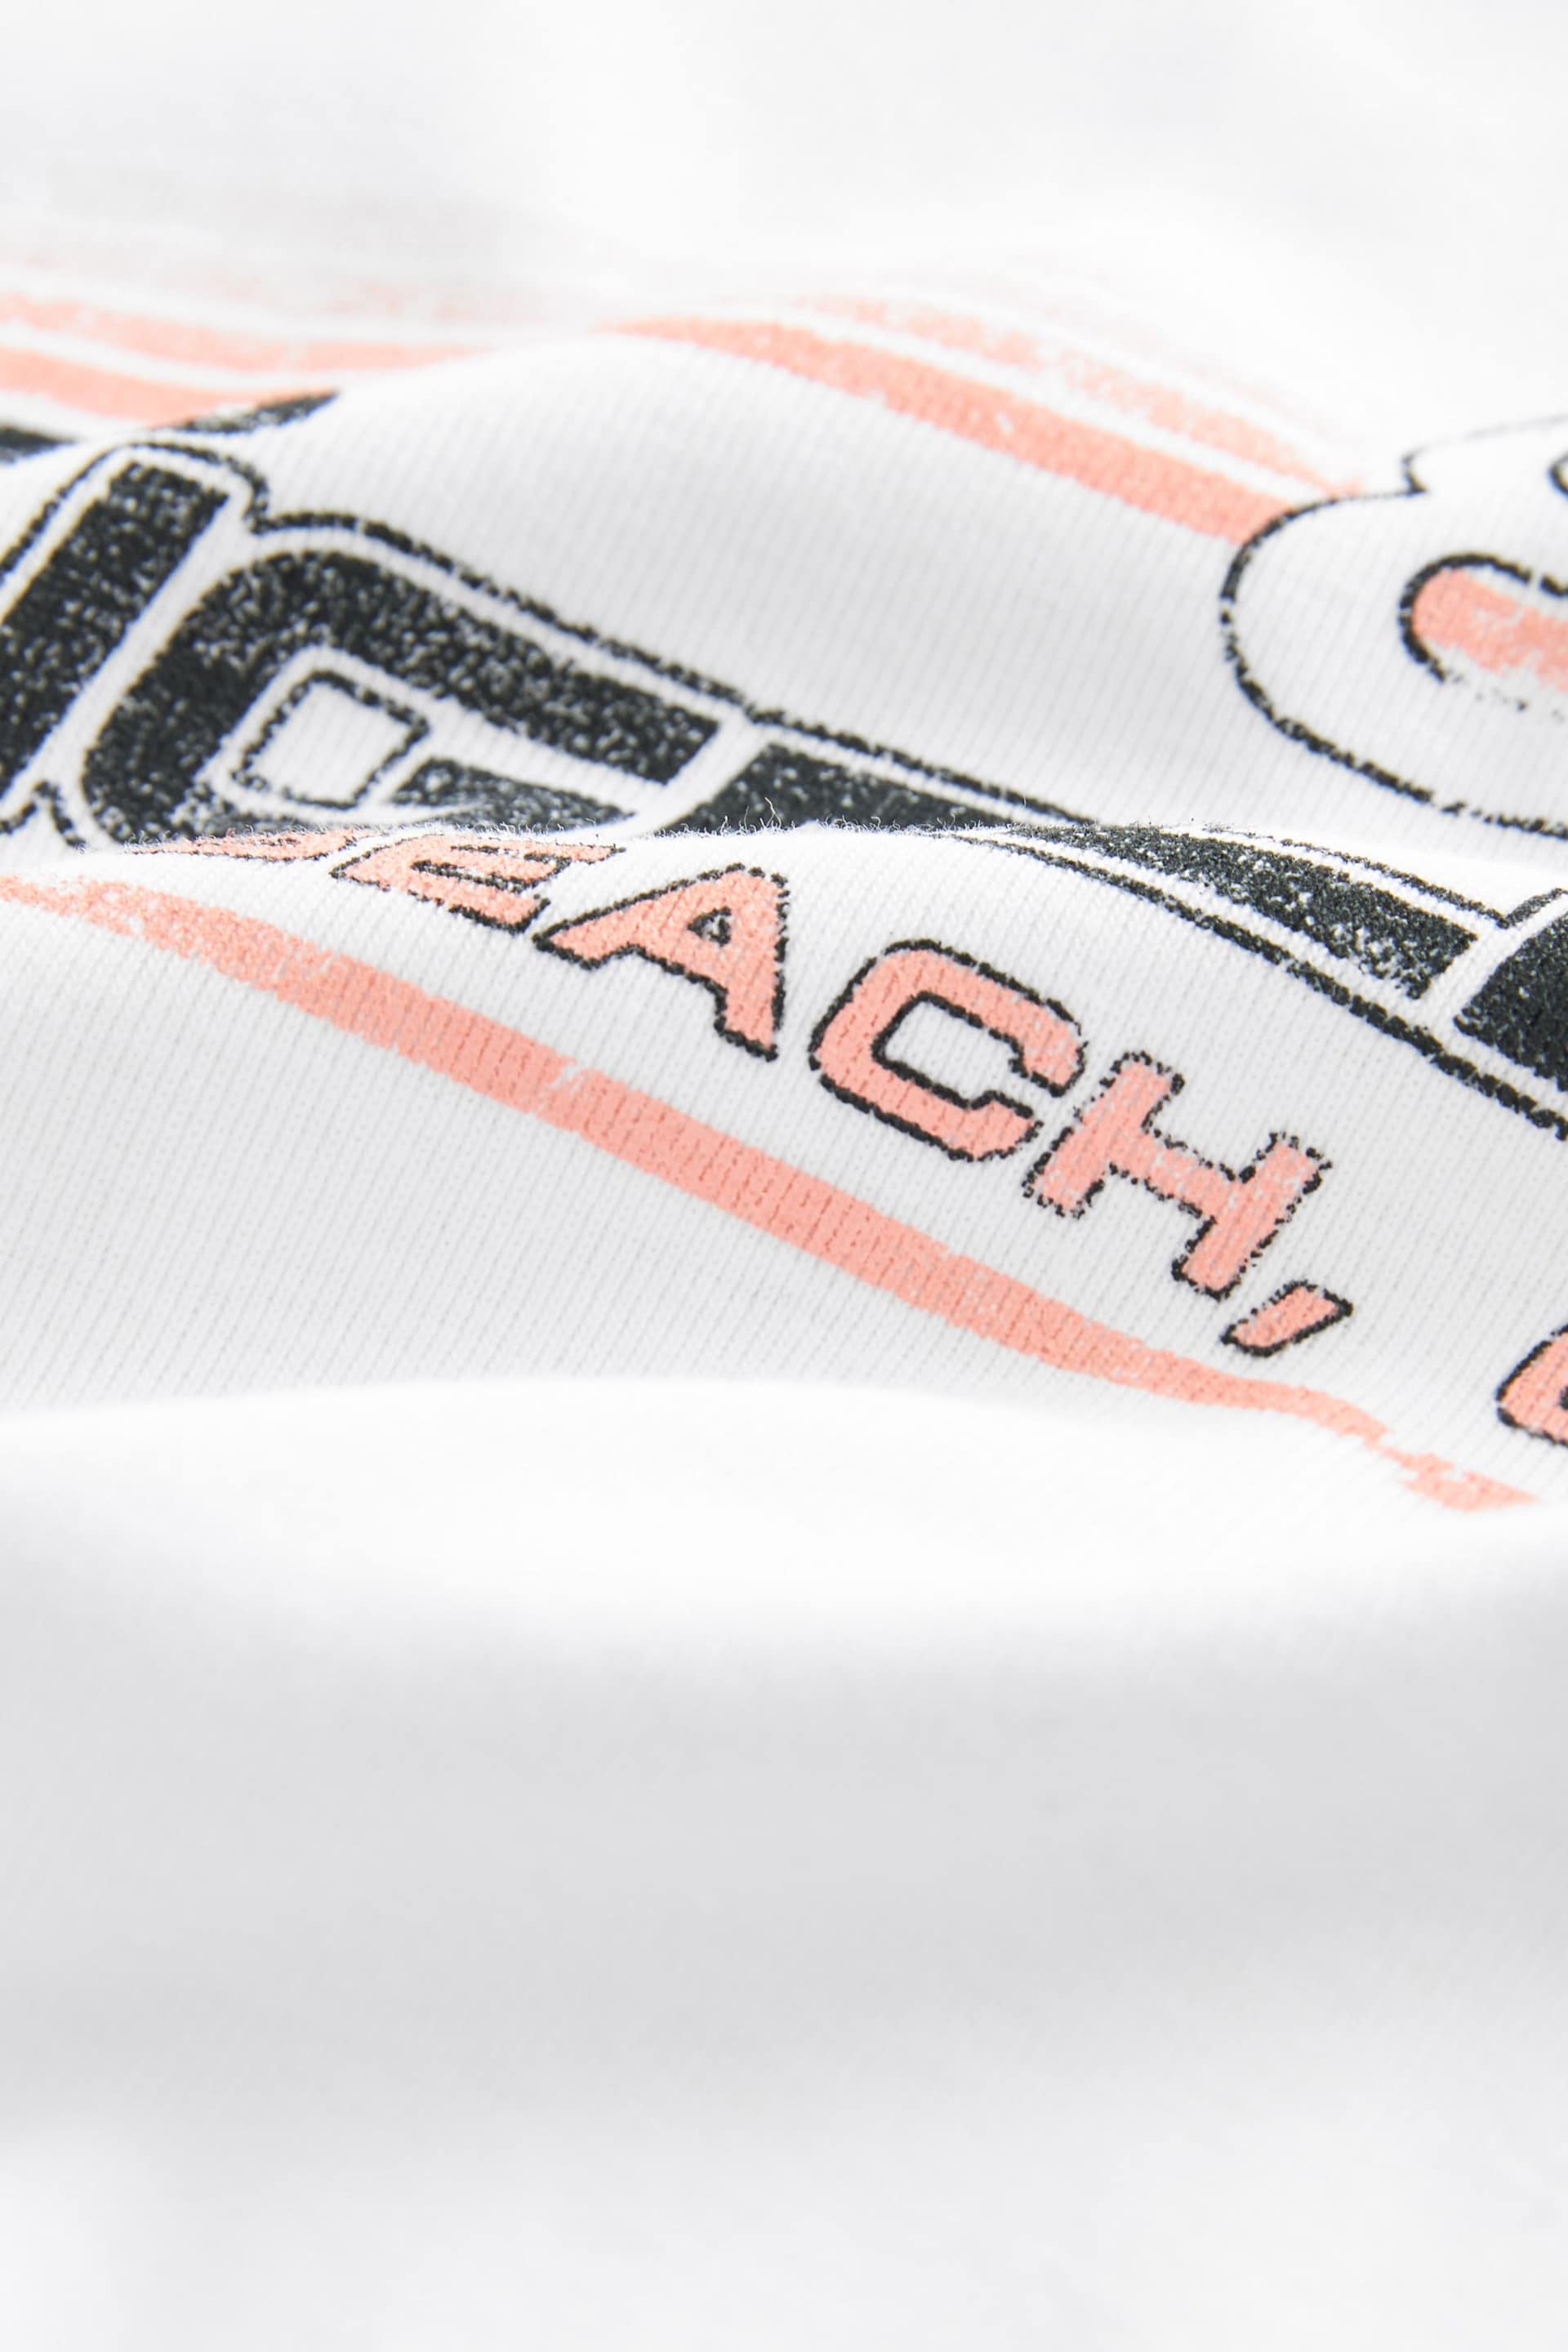 White Slim Fit Short Sleeve Graphic T-Shirt - Image 3 of 4